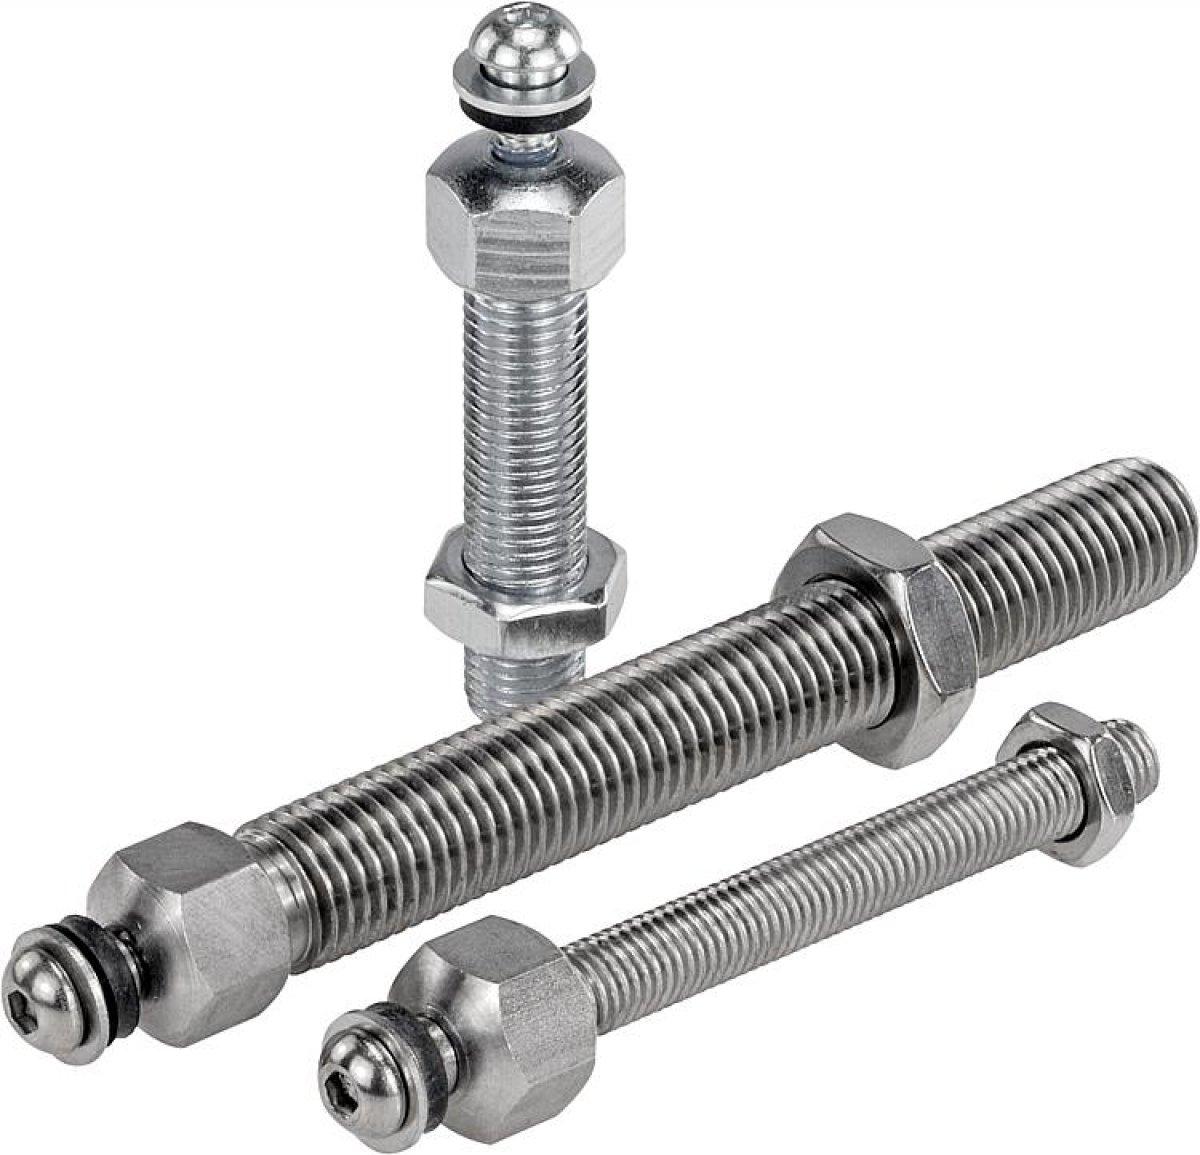 Levelling feet threaded spindles steel or stainless steel